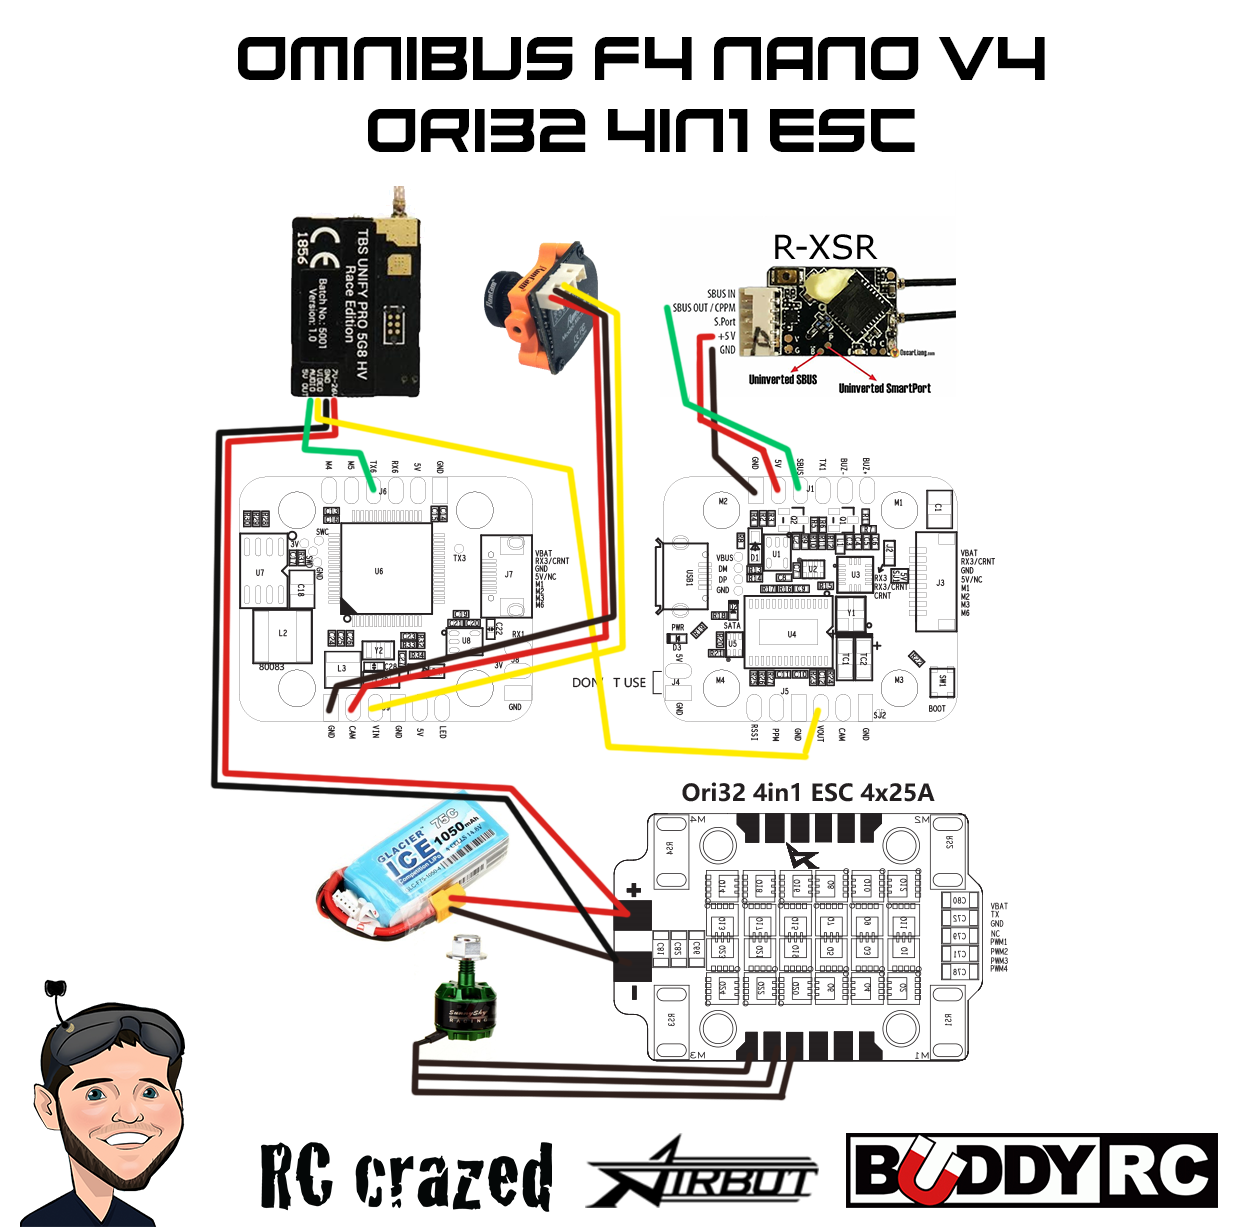 Frsky R-Xsr Wiring Diagram from coreysnyder.me